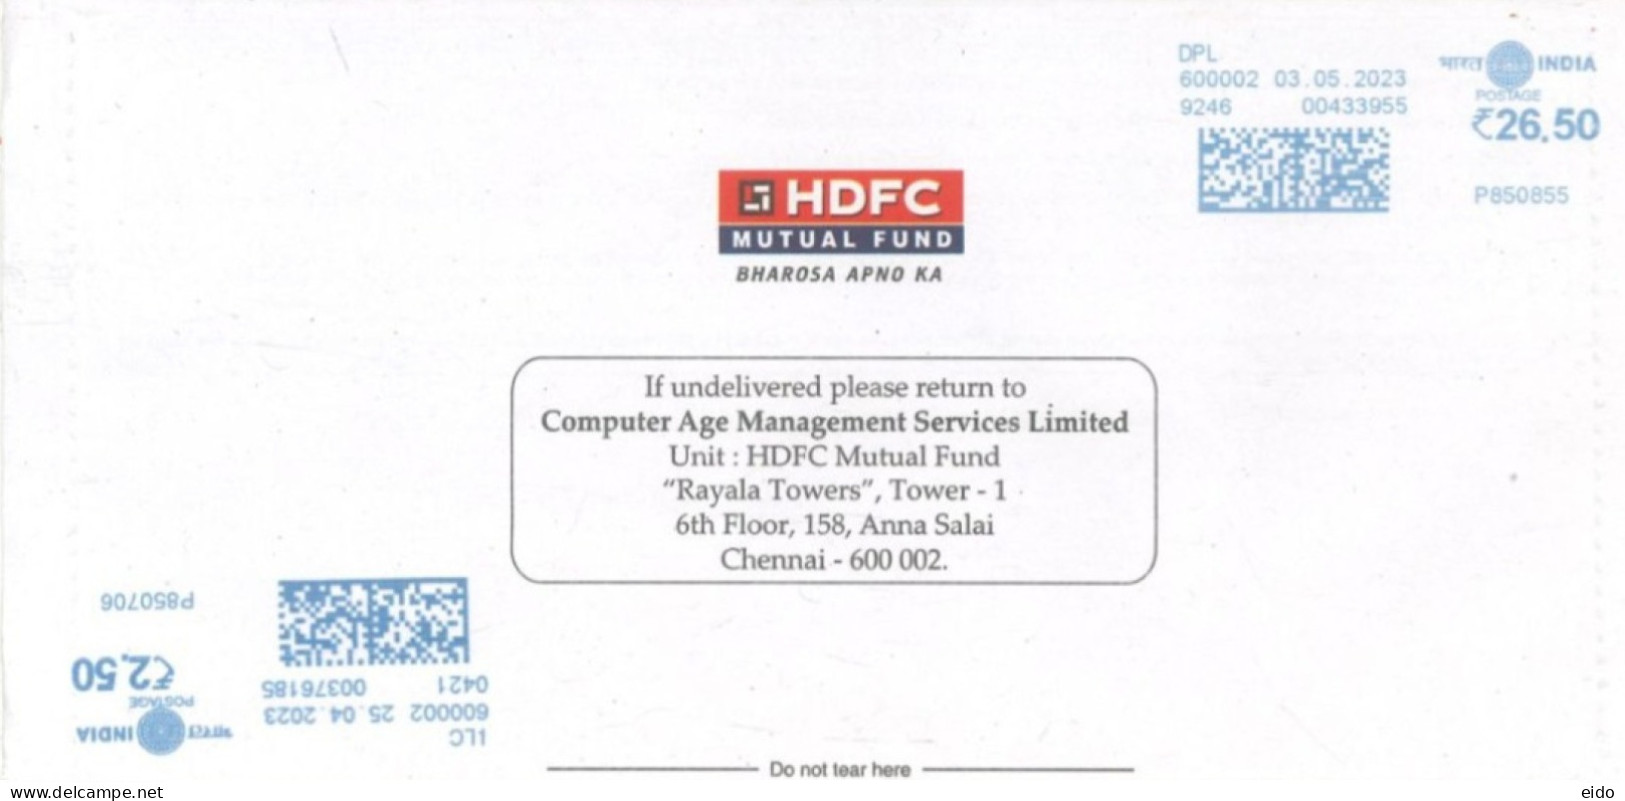 INDIA - 2023 - POSTAL FRANKING MACHINE COVER TO DUBAI. - Covers & Documents